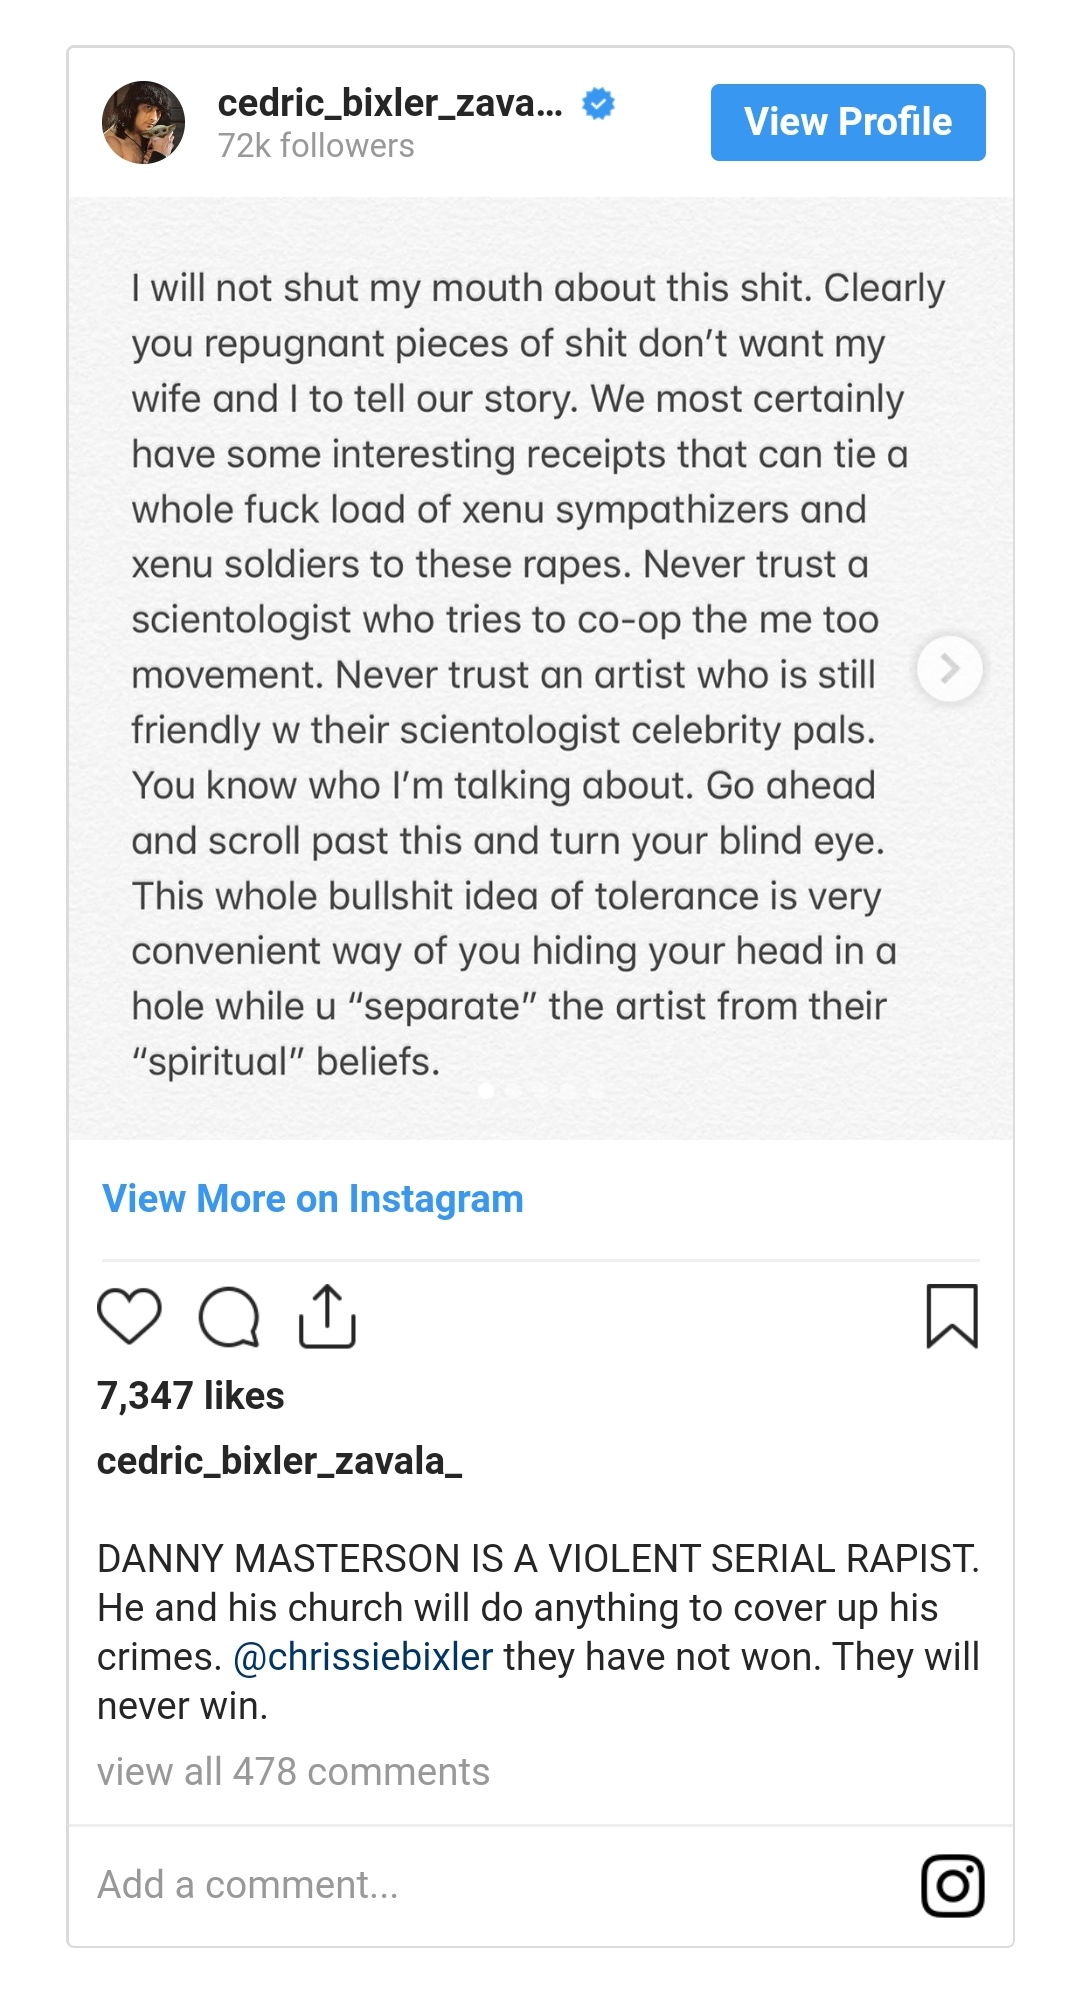 document - cedric_bixler_zava... 72 ers View Profile I will not shut my mouth about this shit. Clearly you repugnant pieces of shit don't want my wife and I to tell our story. We most certainly have some interesting receipts that can tie a whole fuck load